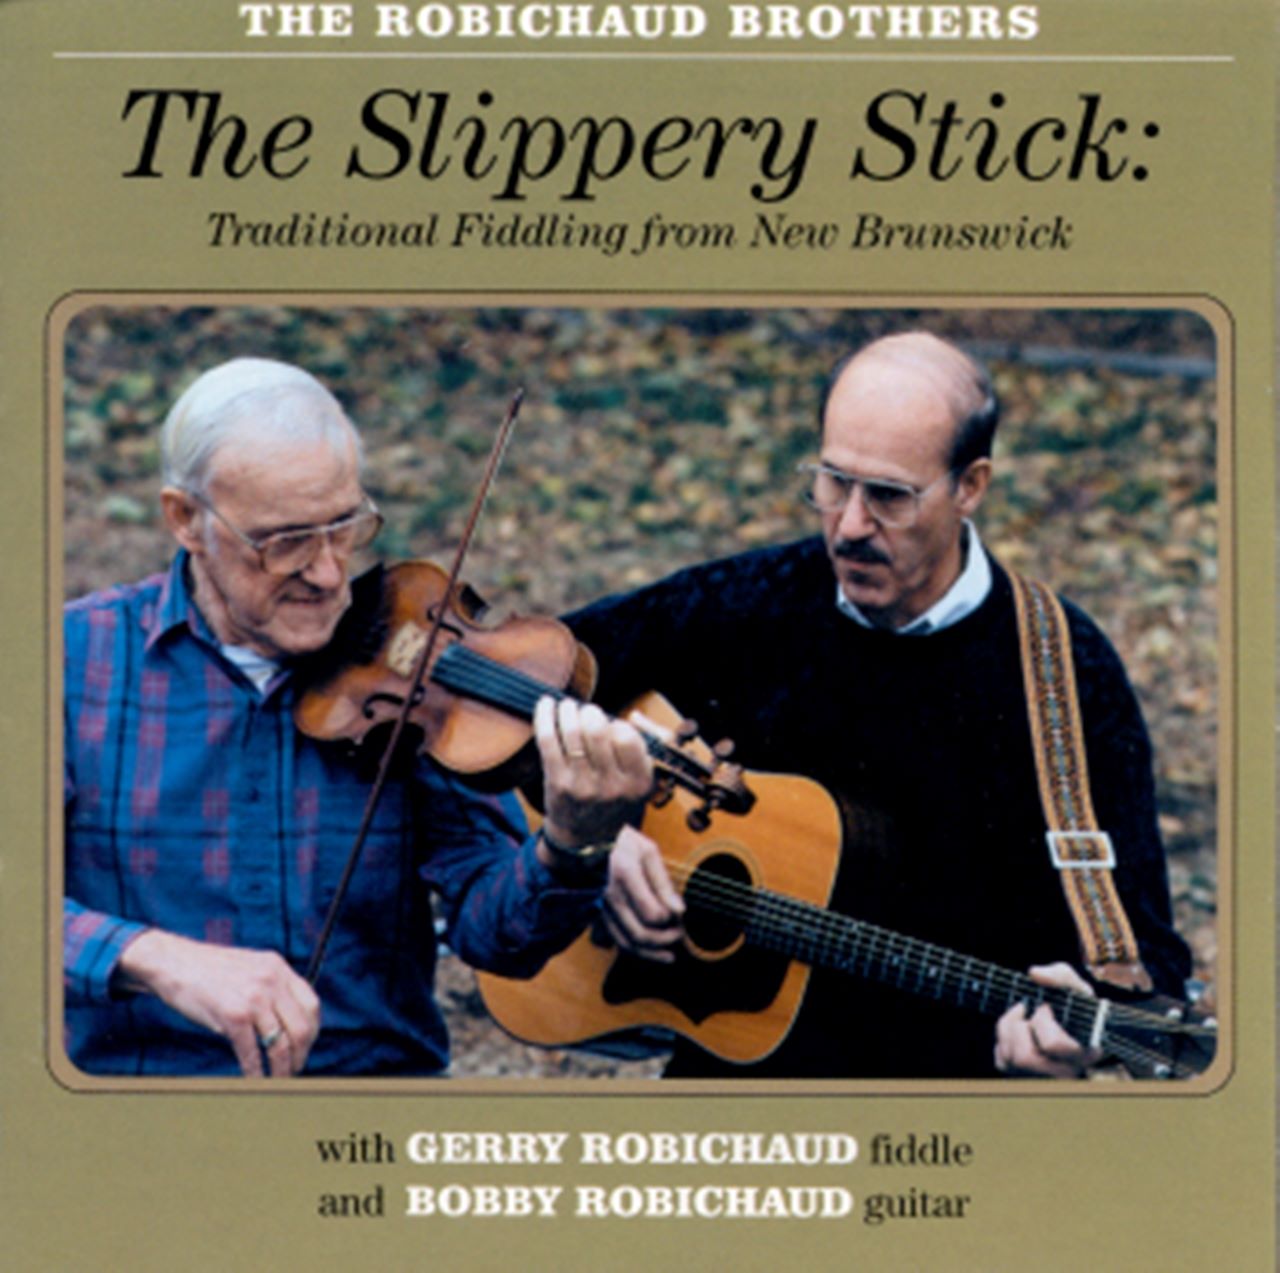 Robichaud Brothers - The Slippery Stick cover album